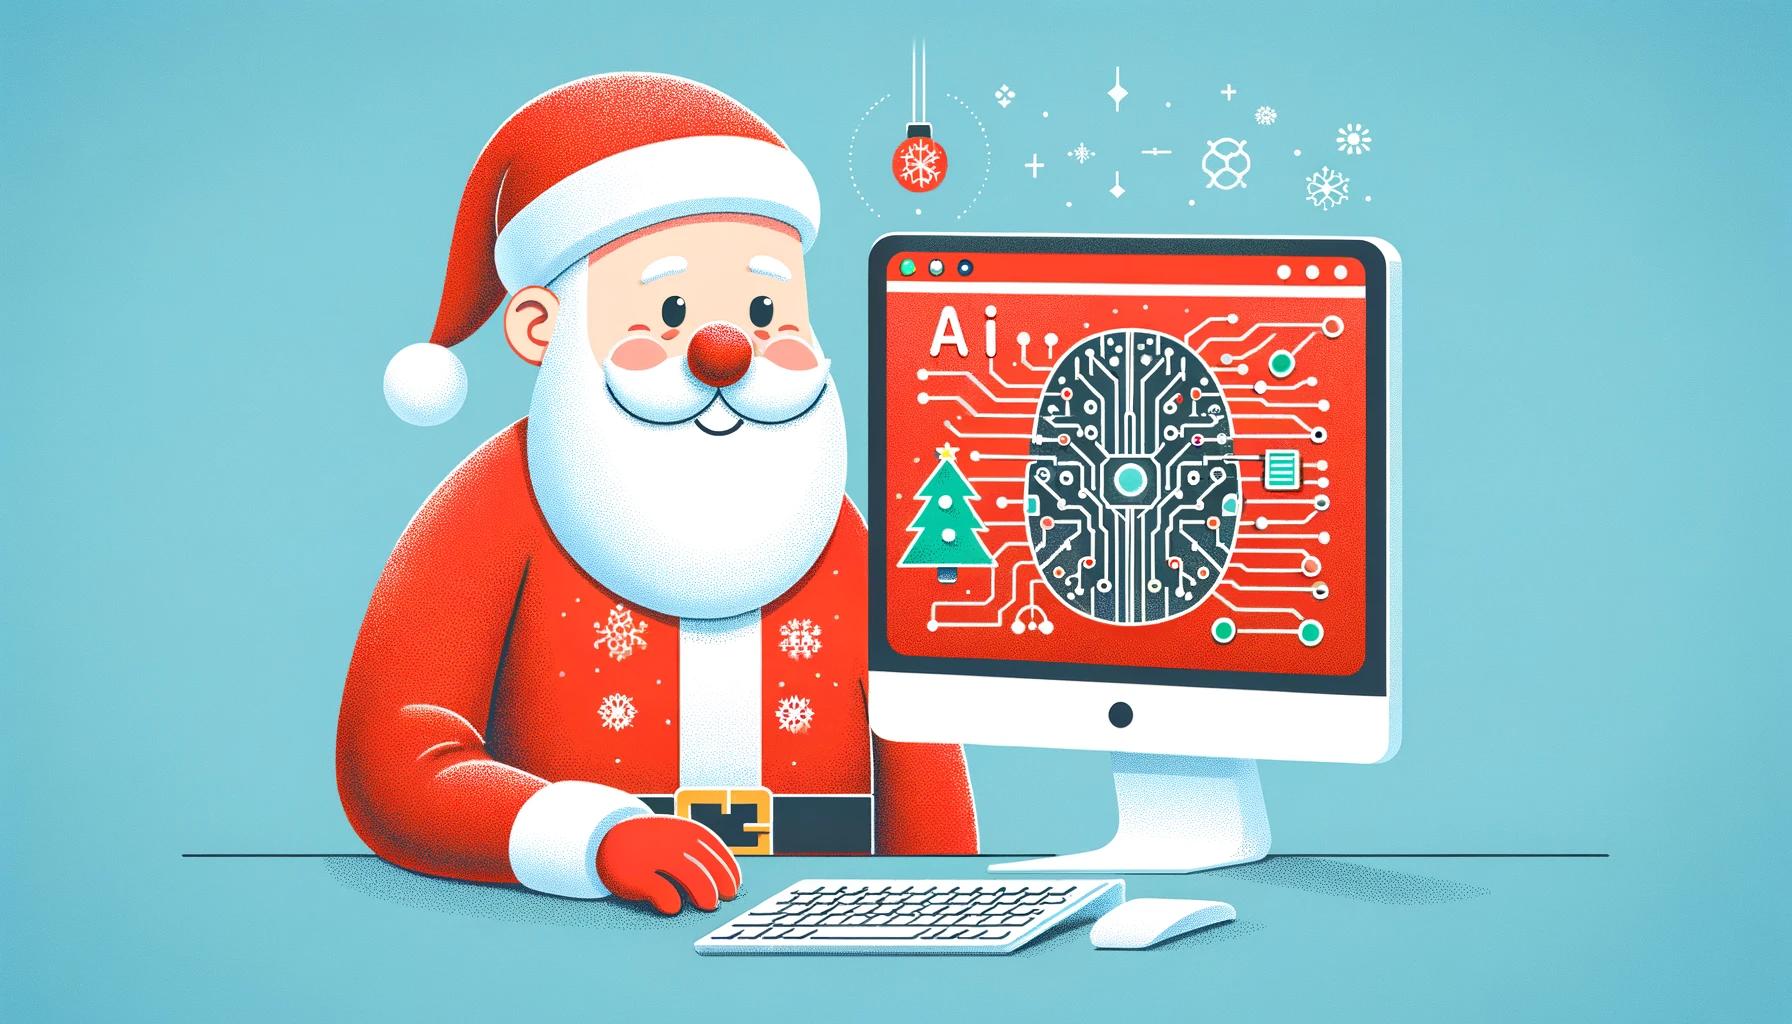 openai introduces santagpt your personal gifting guide for a very merry christmas